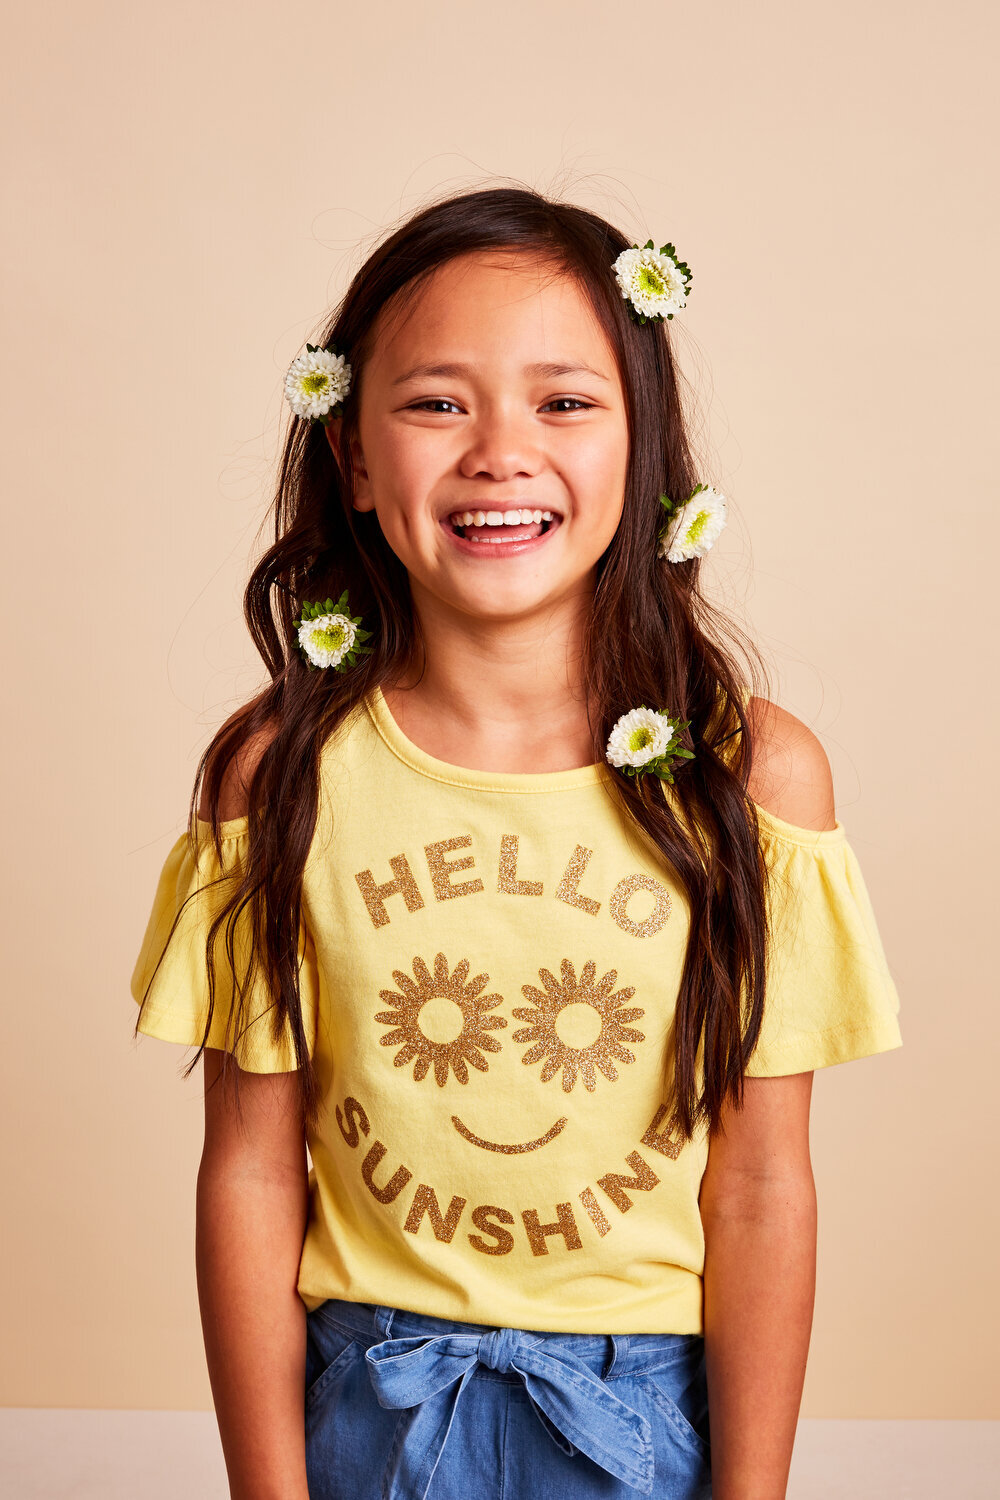 Greer Rivera Photography Kids Editorial Photoshoots Marin CA Girl with flowers in her hair smiling